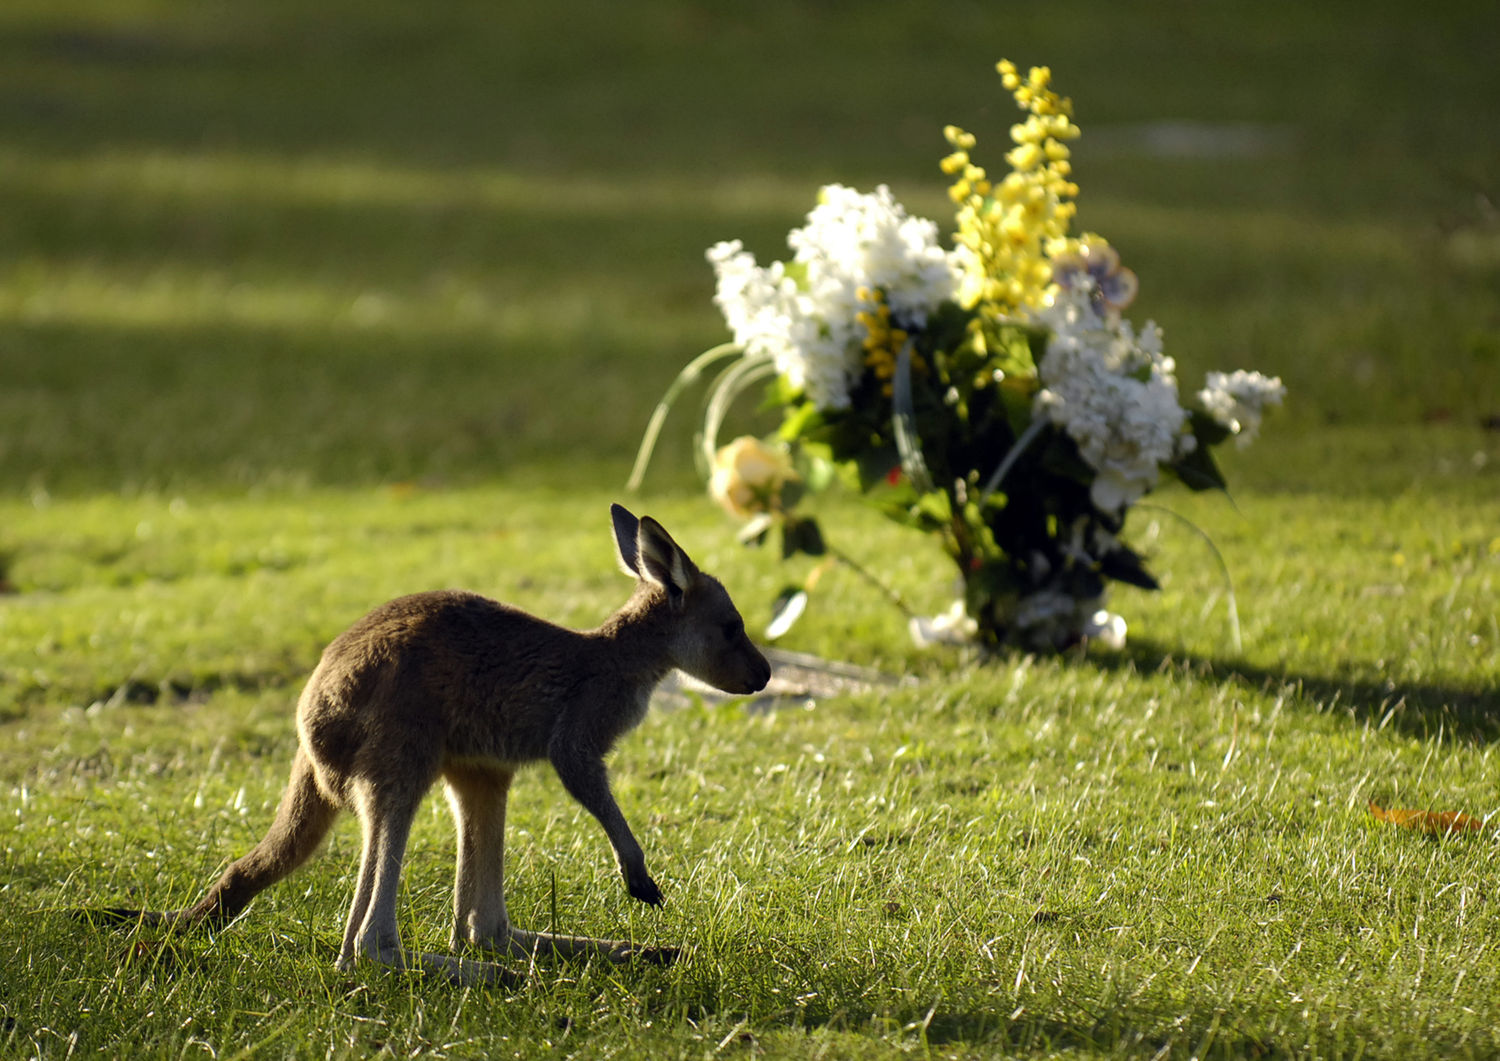 joey near burial plaque with floral tribute at Pinnaroo Valley Memorial Park